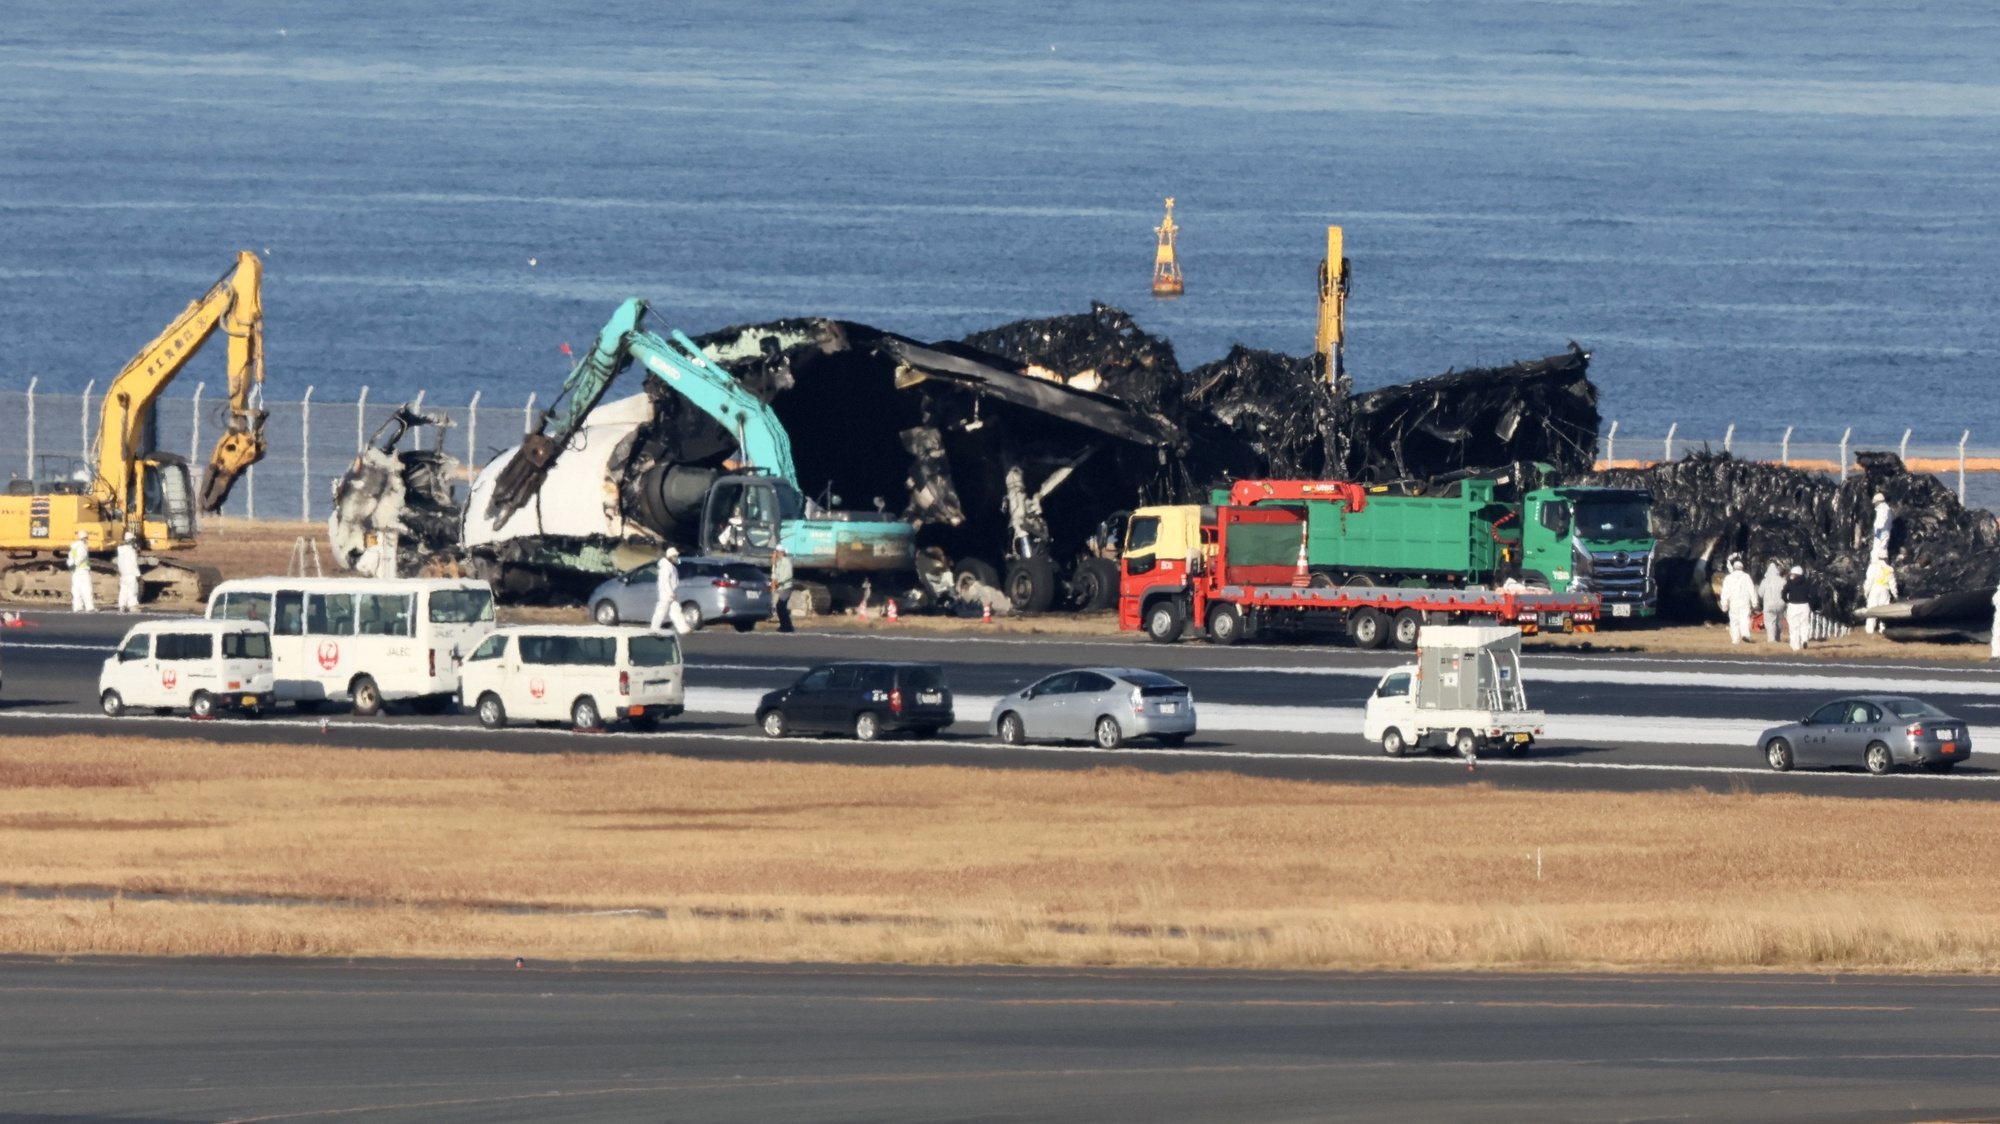 epa11058376 Workers start to remove wreckage following the crash of a Japan Airlines passenger plane with a Japan Coast Guard plane at Haneda Airport in Tokyo, Japan, 05 January 2024. The passenger plane carrying 367 passengers and 12 crew crashed with a Japan Coast Guard plane for transporting relief supplies for the earthquake hit areas. All passengers and crew on board the passenger plane evacuated safely. Tokyo Metropolitan Police confirmed five of six crew on board the Japan Coast Guard plane were dead. Japan Airlines announced on 03 January that the JAL aircraft recognized the controller&#039;s permission to land, read it back, and performed the landing operation. It appears that the Japan Coast Guard plane was already on the runway when it attempted to land, and the Japan Transport Safety Board and the Metropolitan Police Department are investigating the interaction between the controller and the two planes in detail to determine the cause of the accident.  EPA/JIJI PRESS JAPAN OUT EDITORIAL USE ONLY